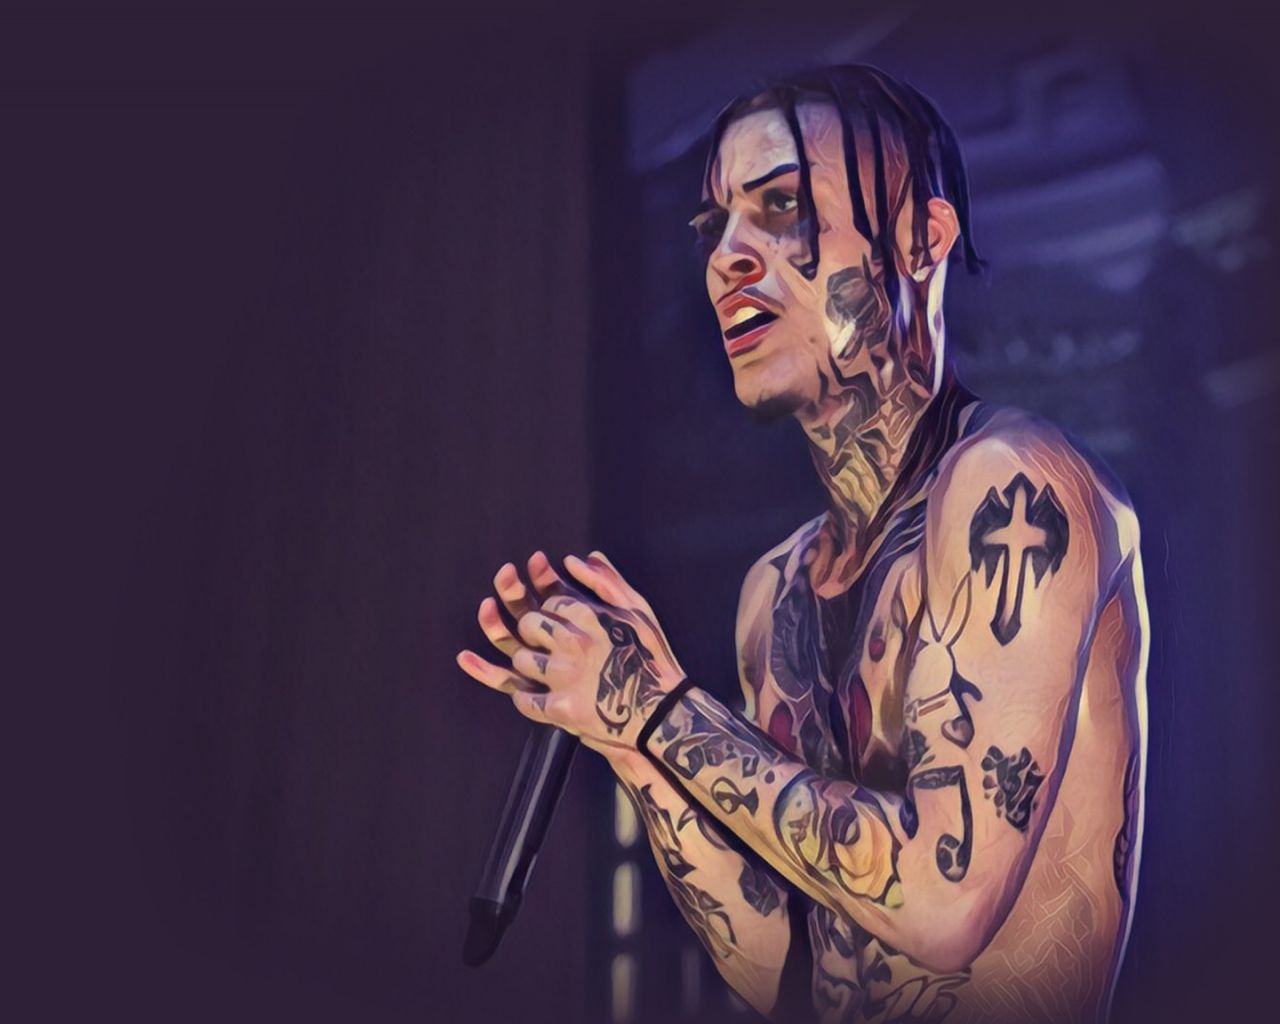 Free download Lil Skies Wallpaper for desktop and mobile in HD resolution [1440x2960] for your Desktop, Mobile & Tablet. Explore Lil Skies Wallpaper. Lil Skies Wallpaper, Lil Skies Albums